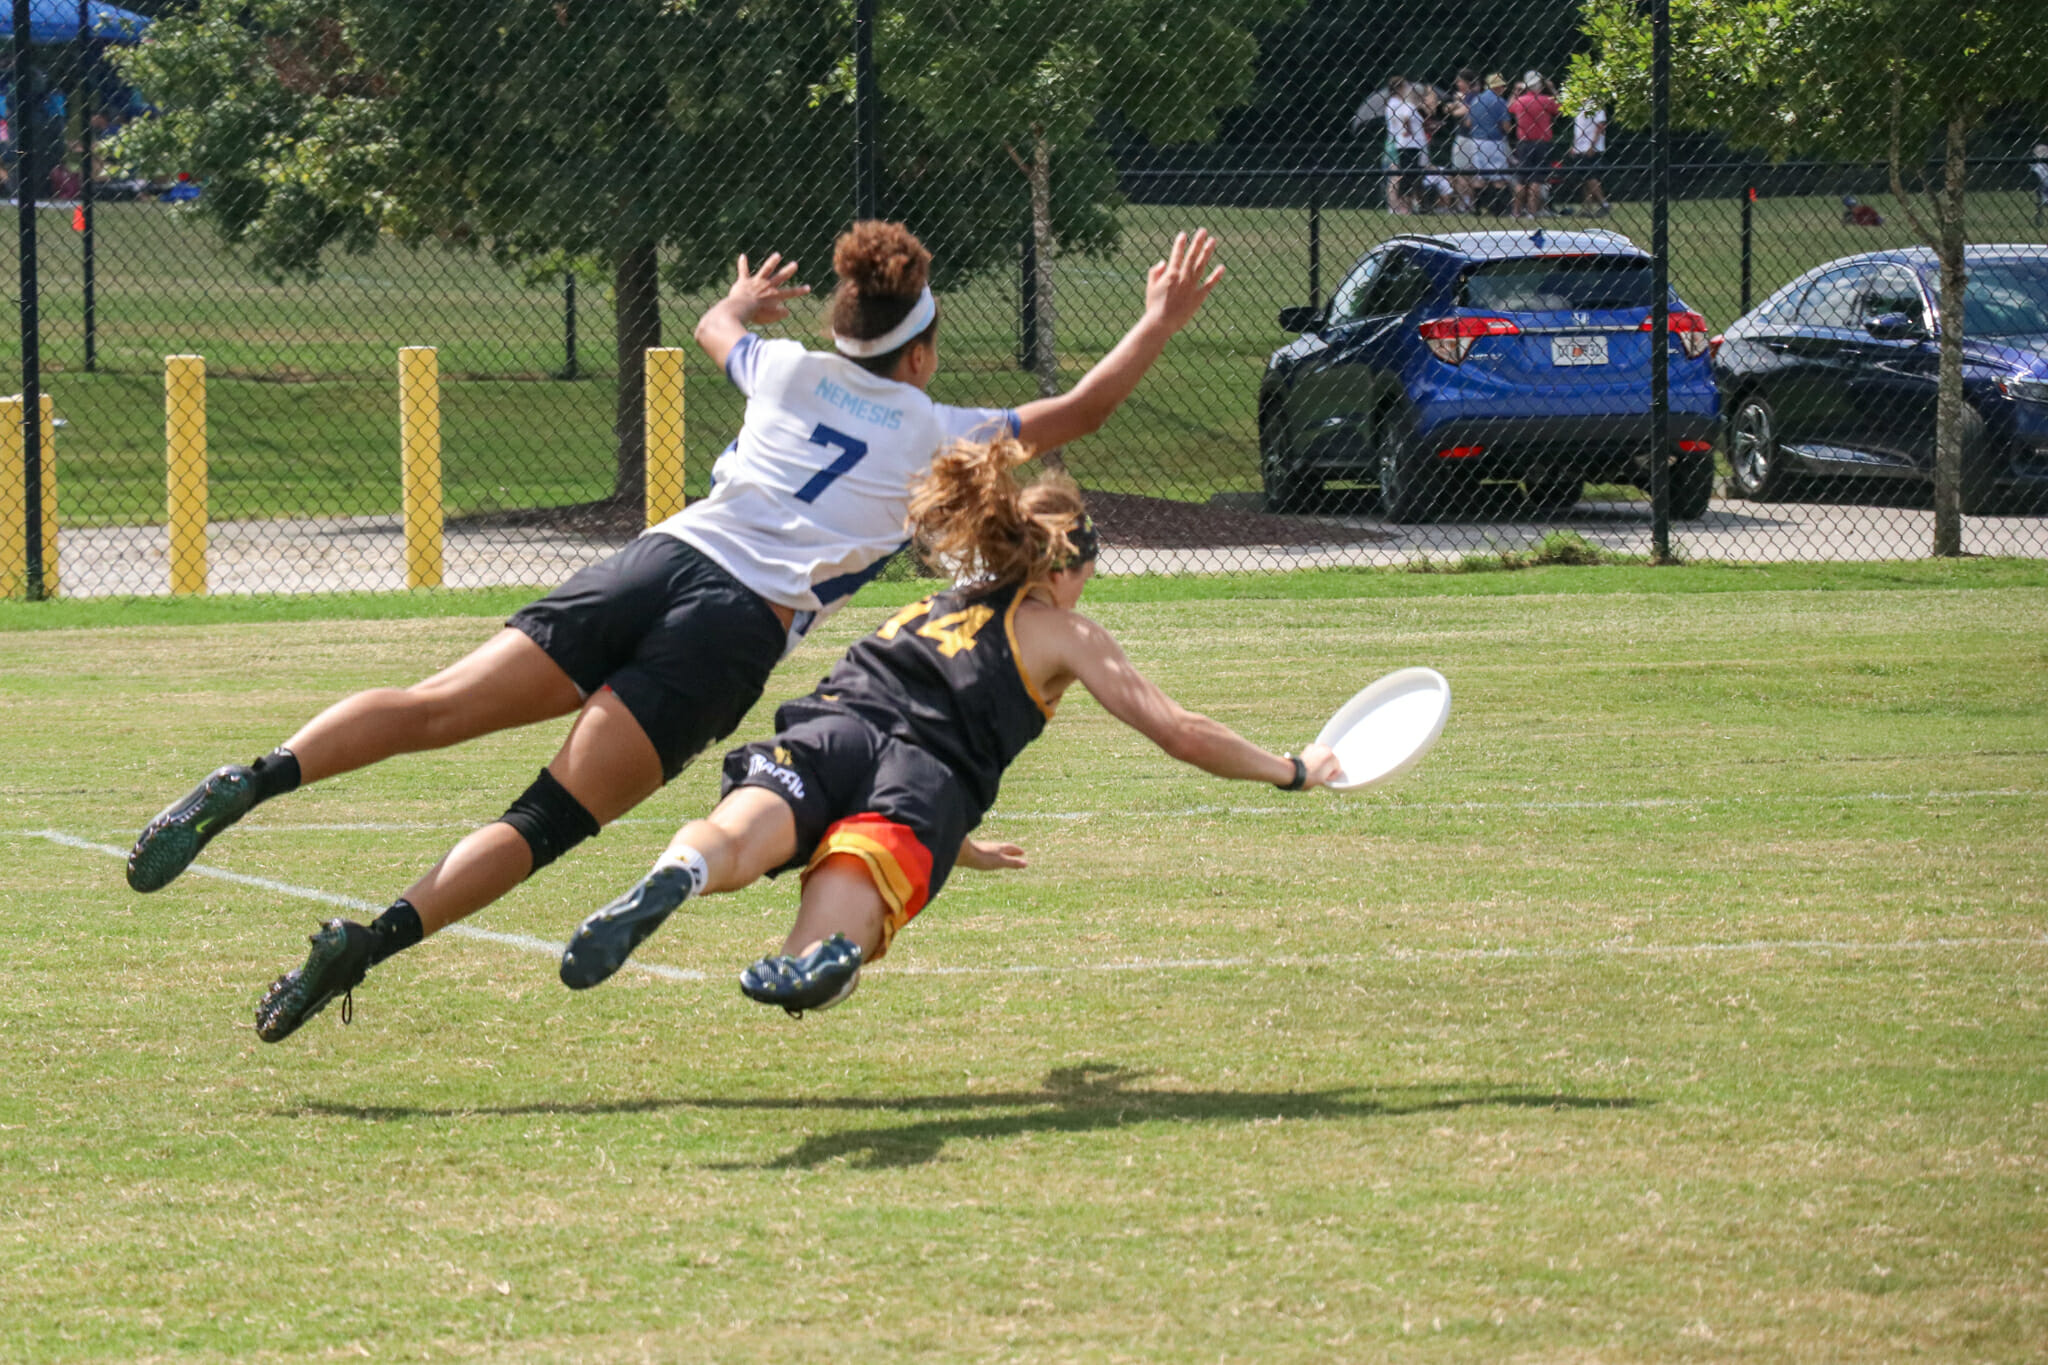 2023 Masters Championships - Event News, Stats, Schedule & More - Ultiworld